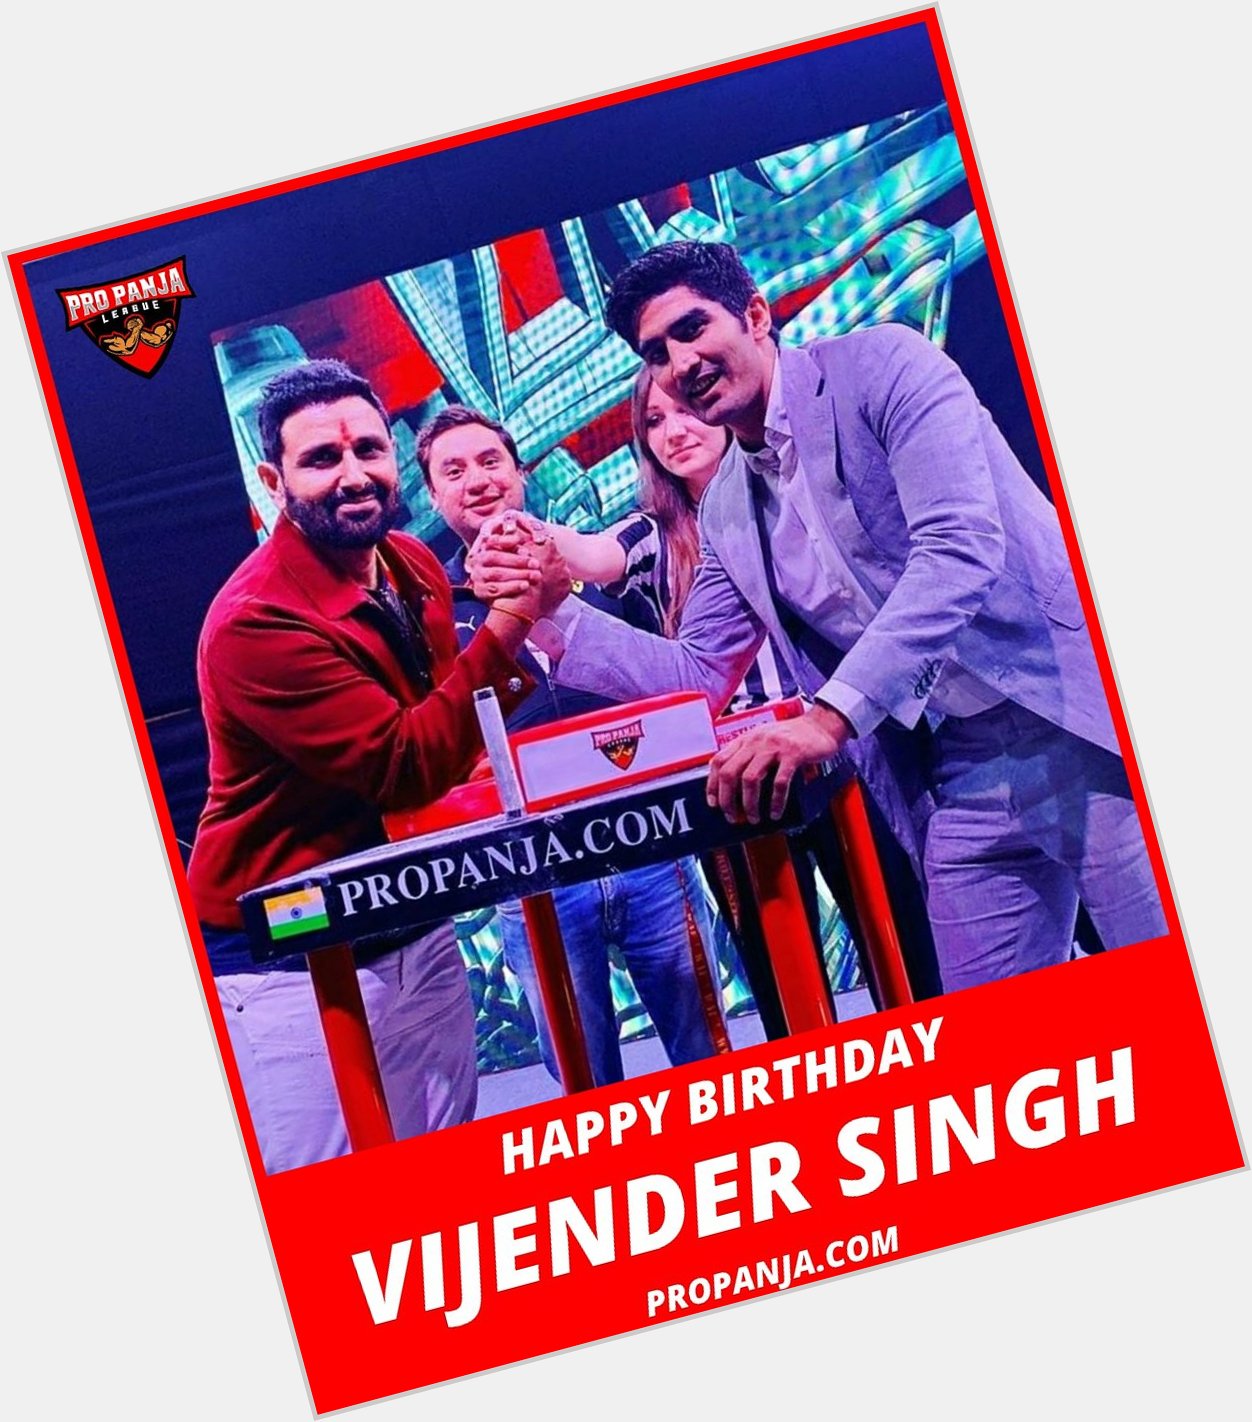 Wishing the King of the Ring Vijender Singh a Very Happy Birthday! .  